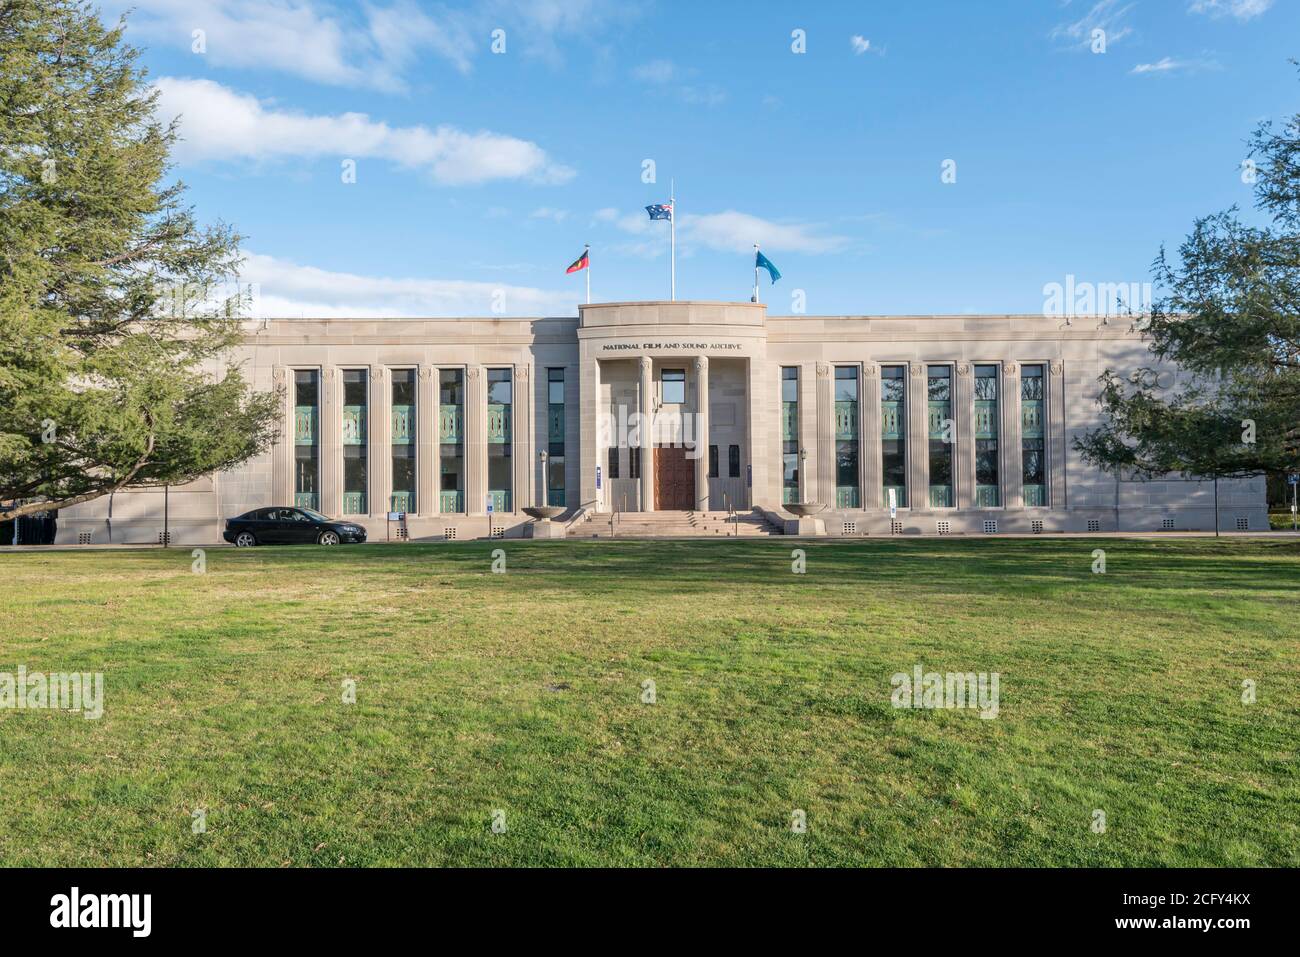 The National Film and Sound Archive (formerly Australian Institute of Anatomy 1930-84) in Canberra, Australian Capital Territory, Australia Stock Photo